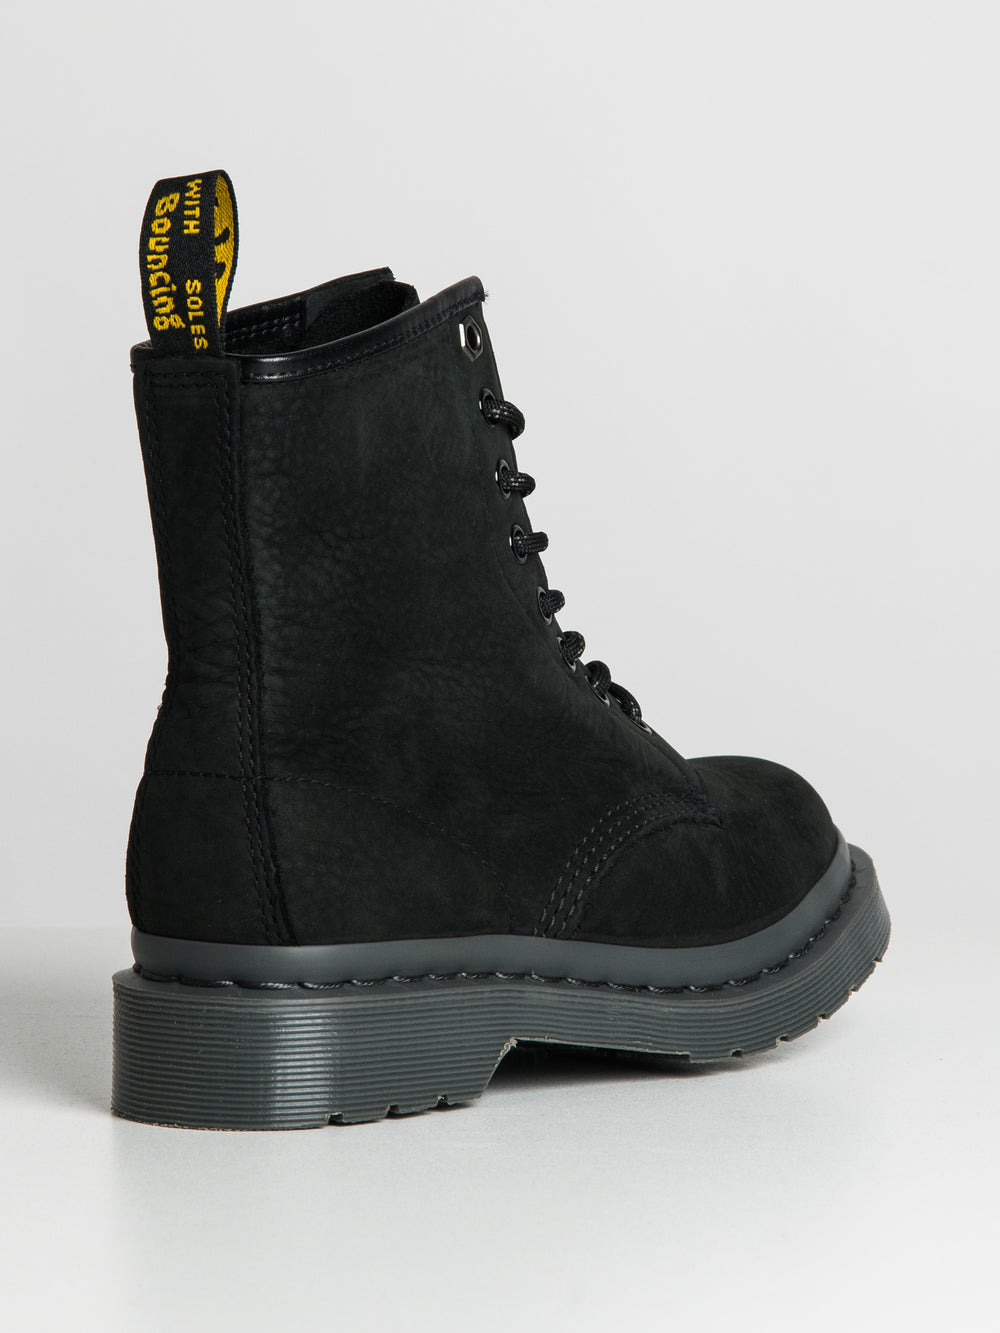 WOMENS DR MARTENS 1460 MILLED NUBUCK WATER PROOF BOOT - CLEARANCE